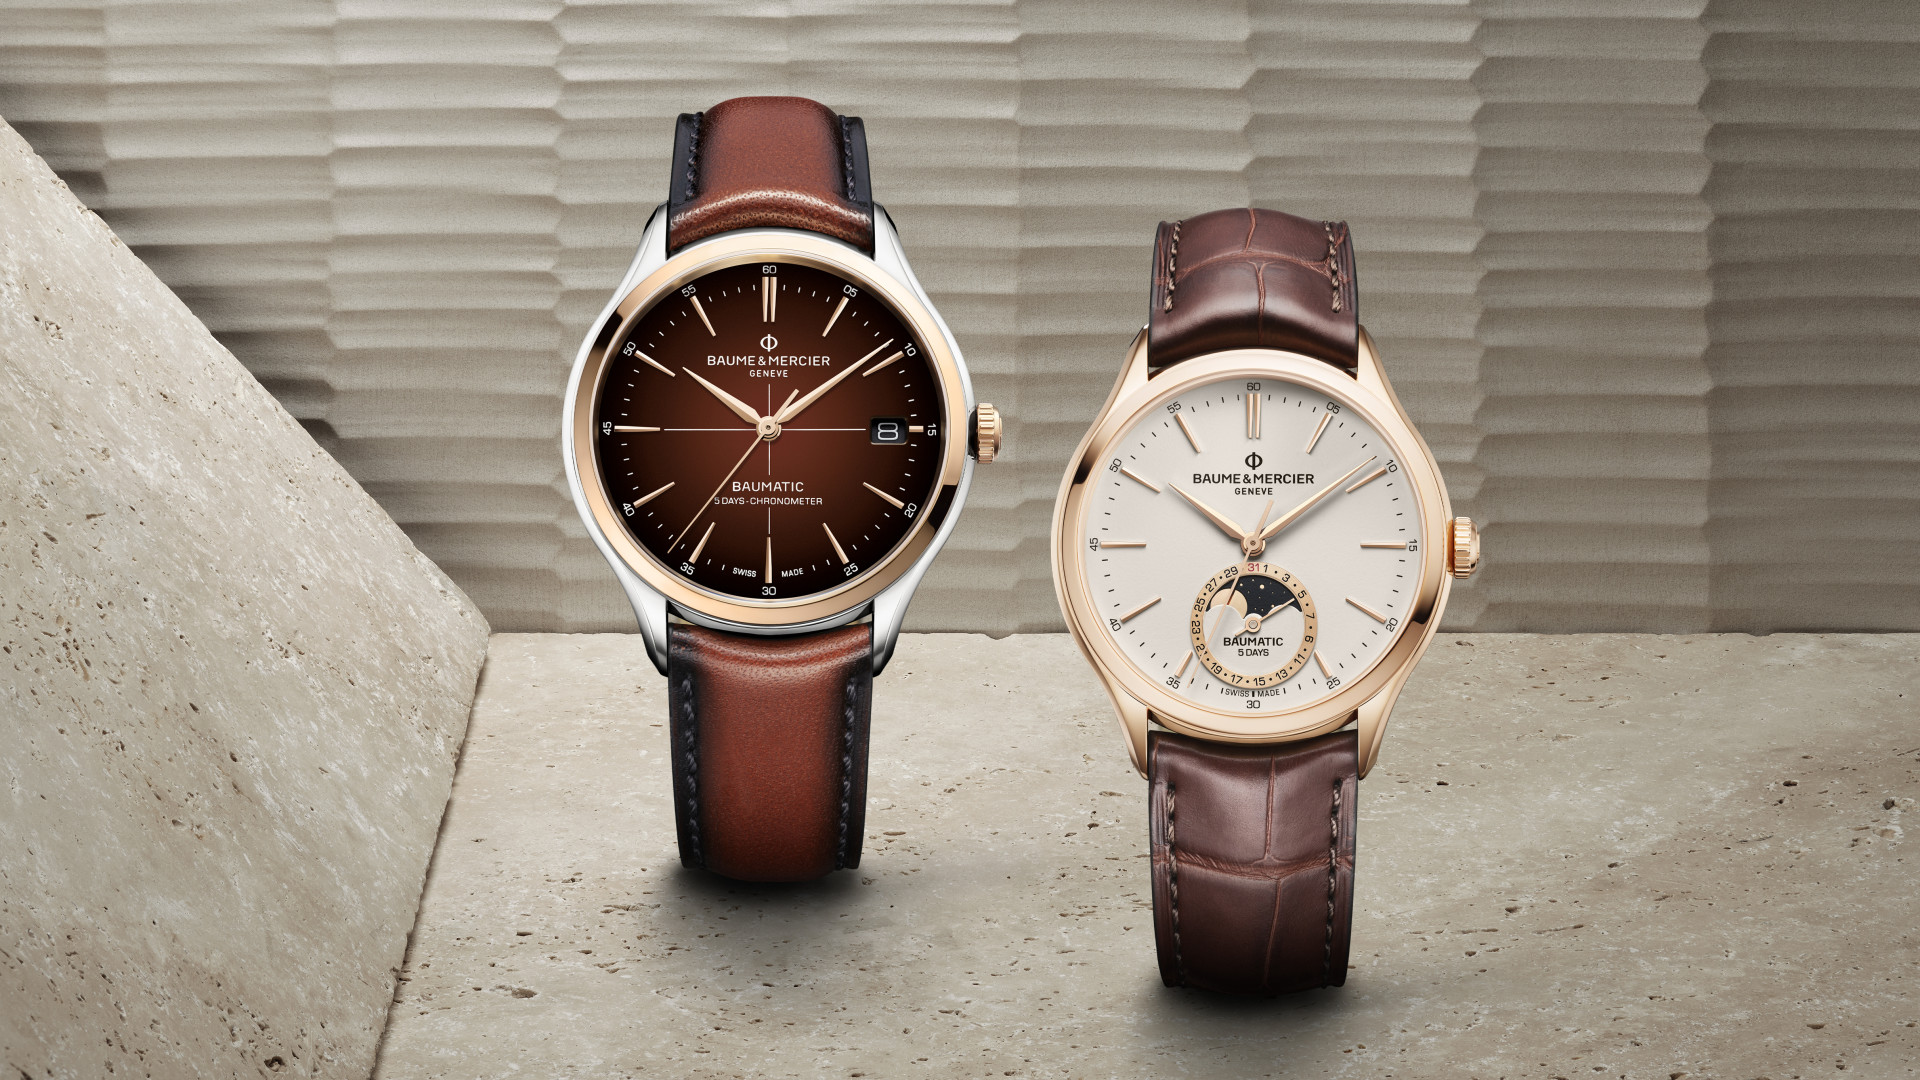 New Baume & Mercier Clifton dressed in gold tones